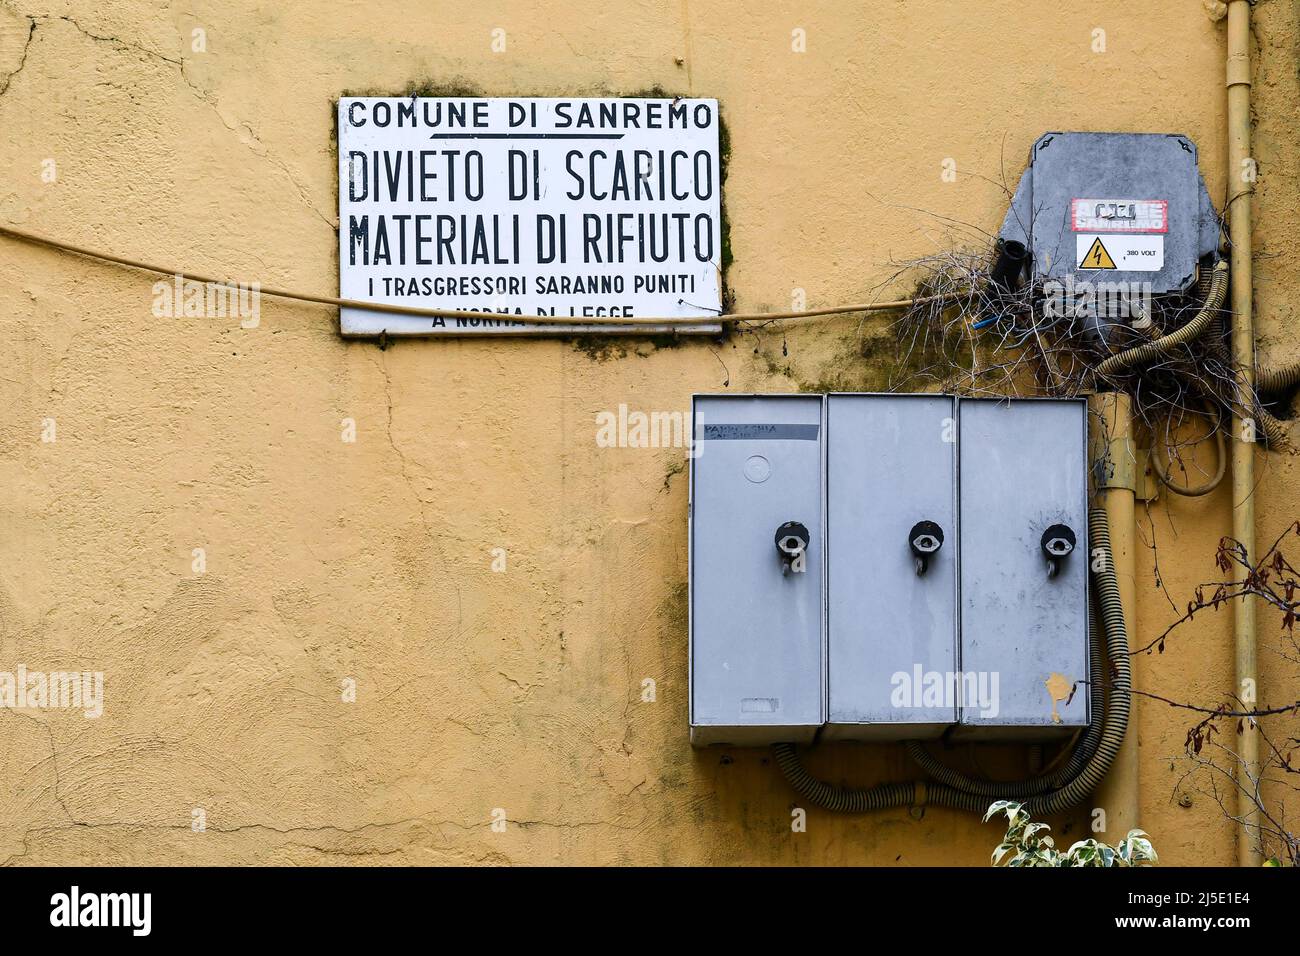 Sign of ban on the dumping of waste hanging next to electricity meters in a street of the old town, Sanremo, Imperia, Liguria, Italy Stock Photo